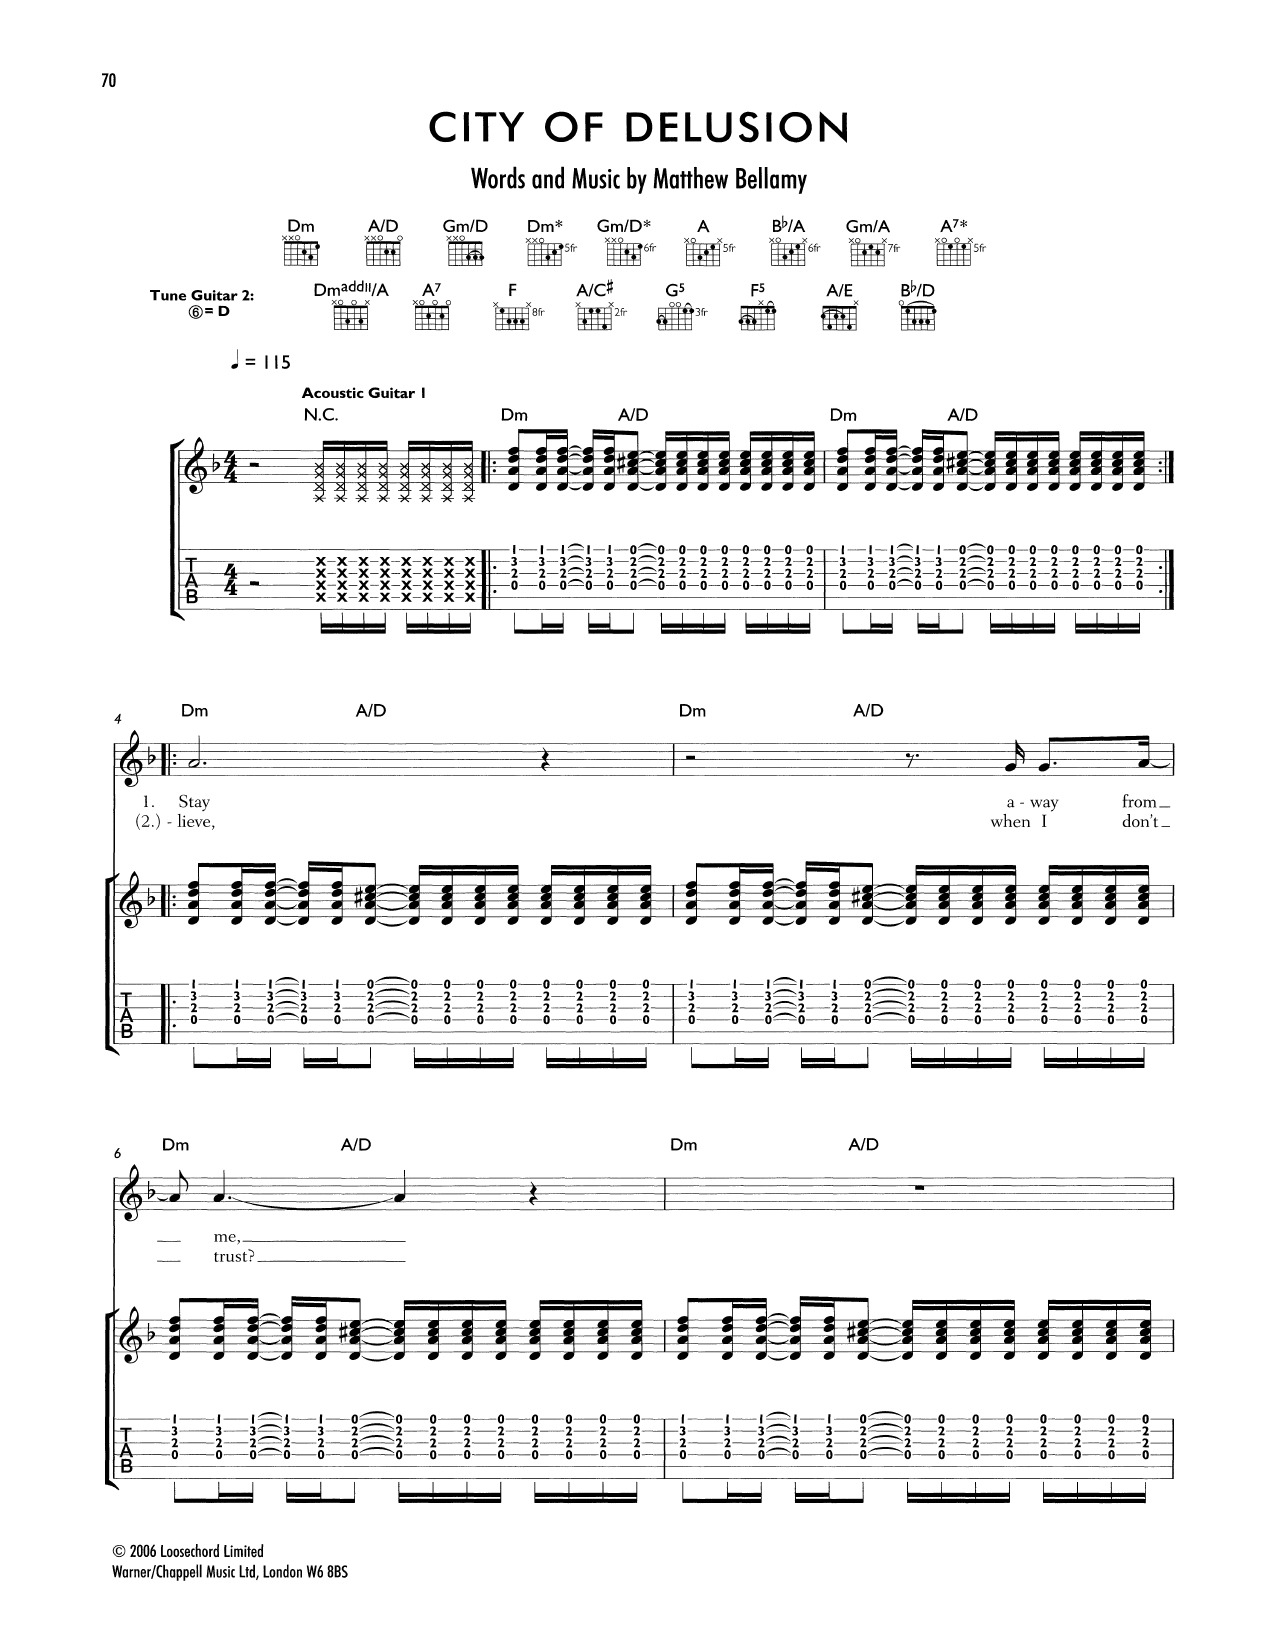 Download Muse City Of Delusion Sheet Music